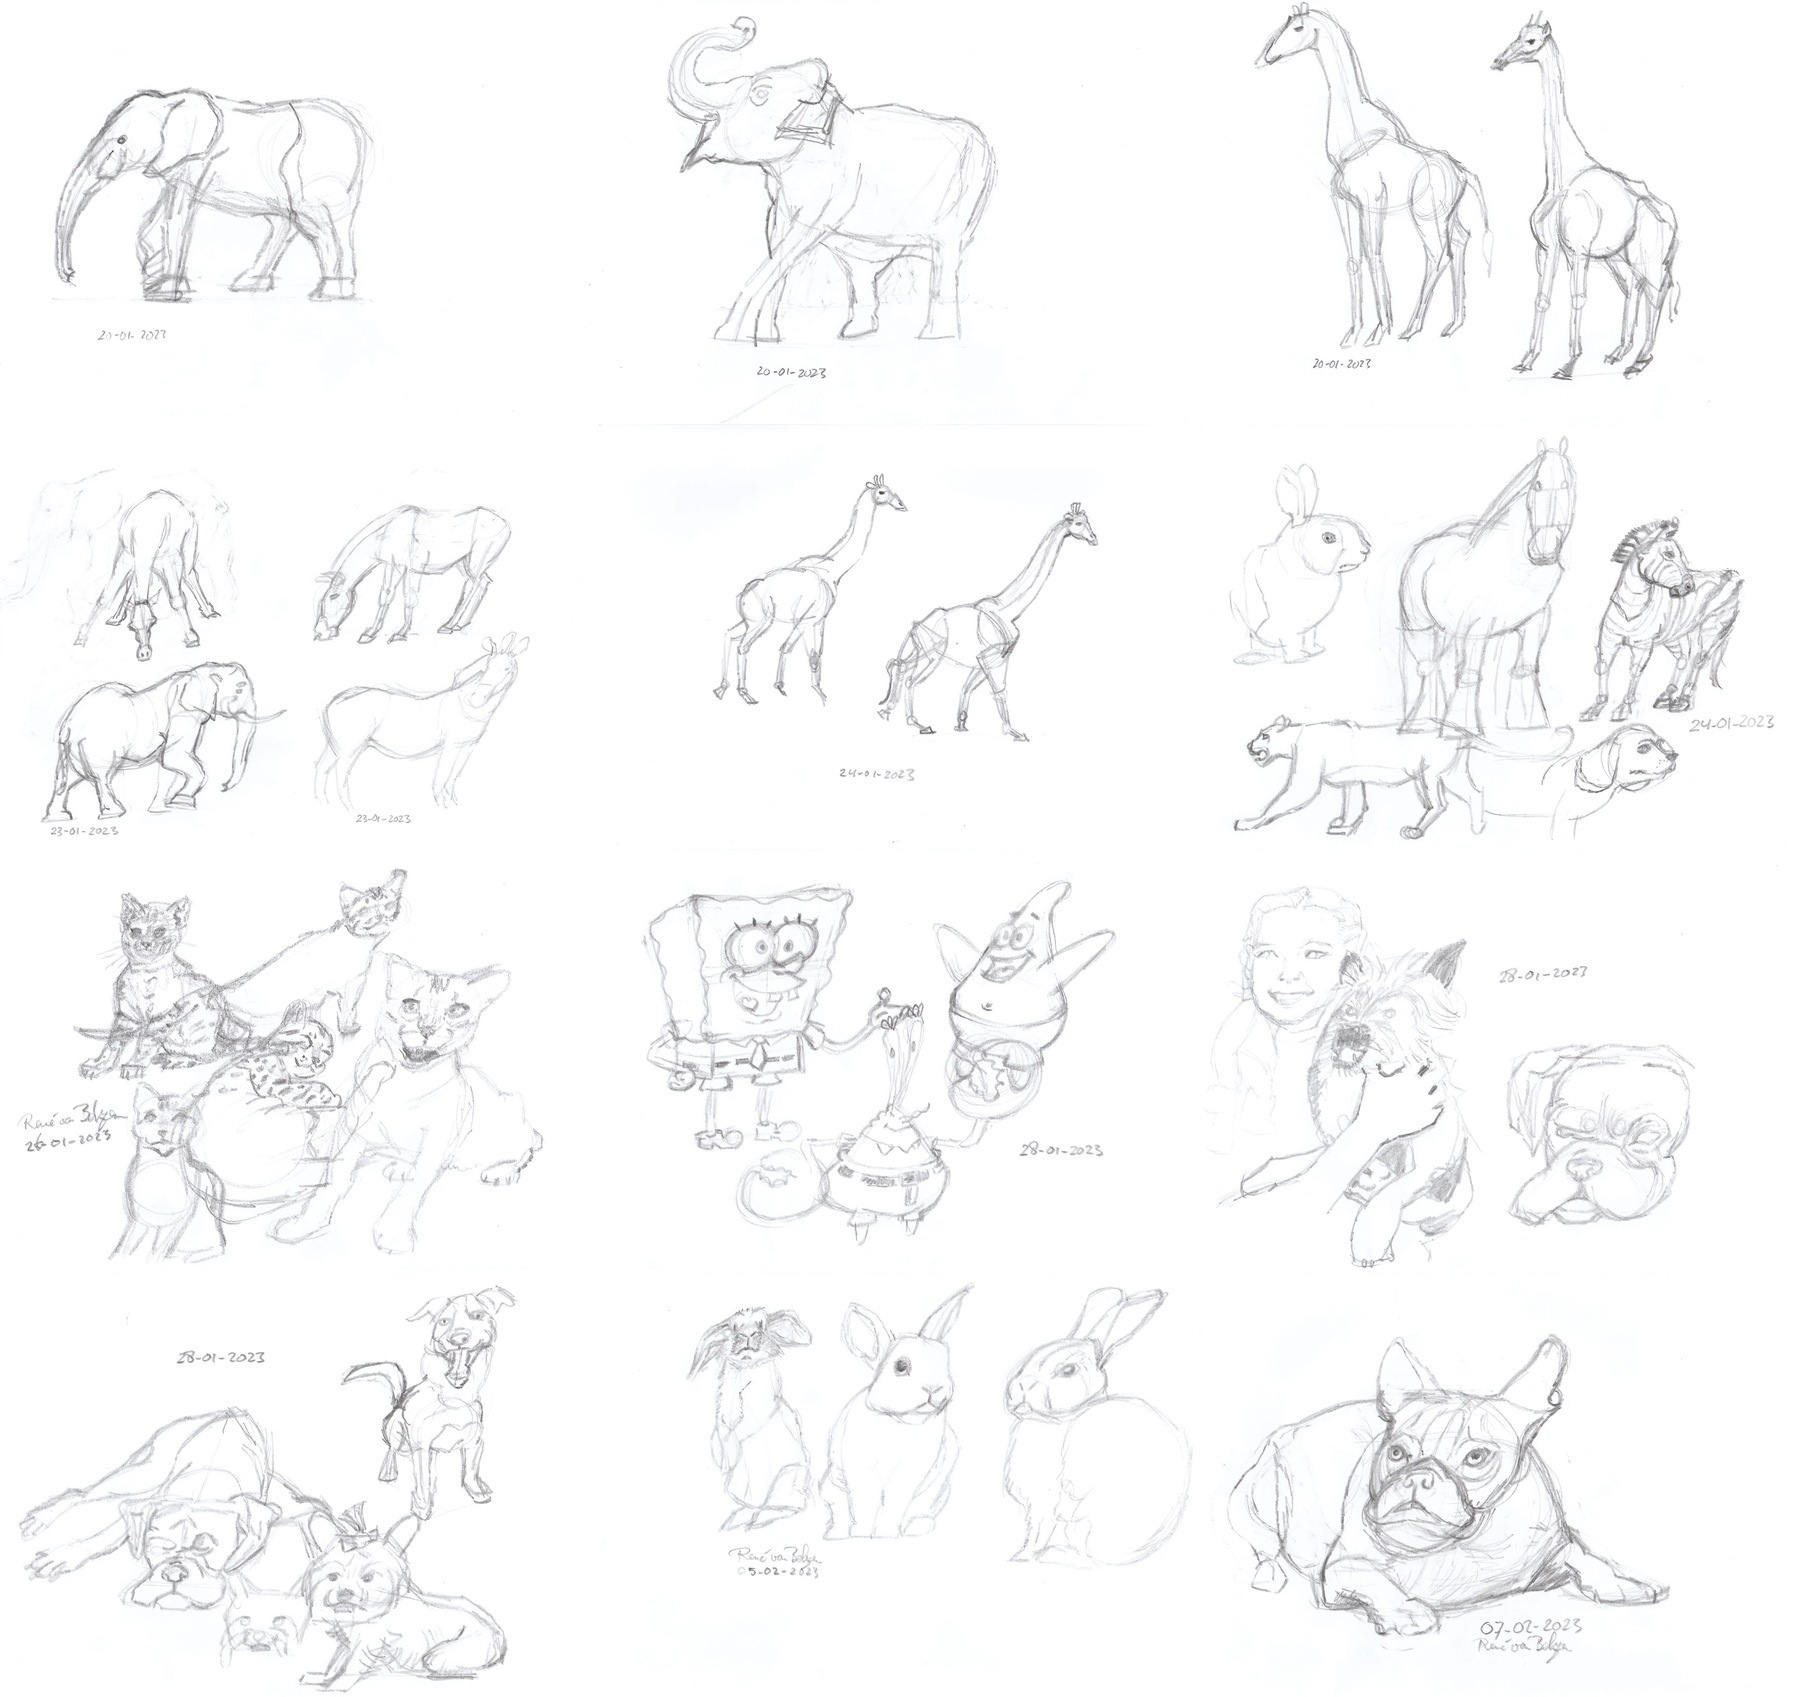 13 pages filled with pencil sketches of mostly animals